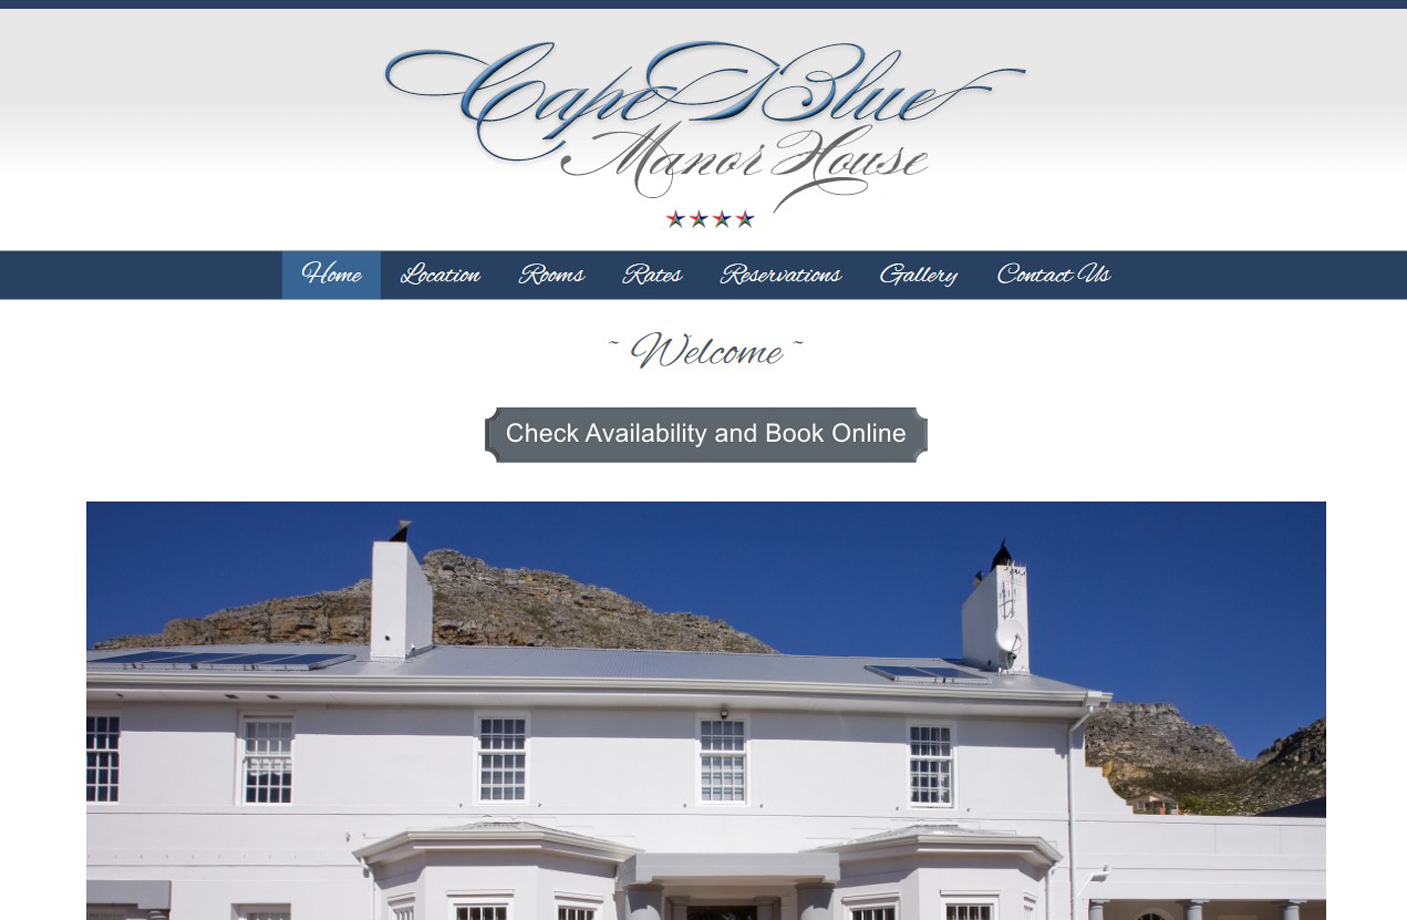 You are currently viewing Cape Blue Manor House